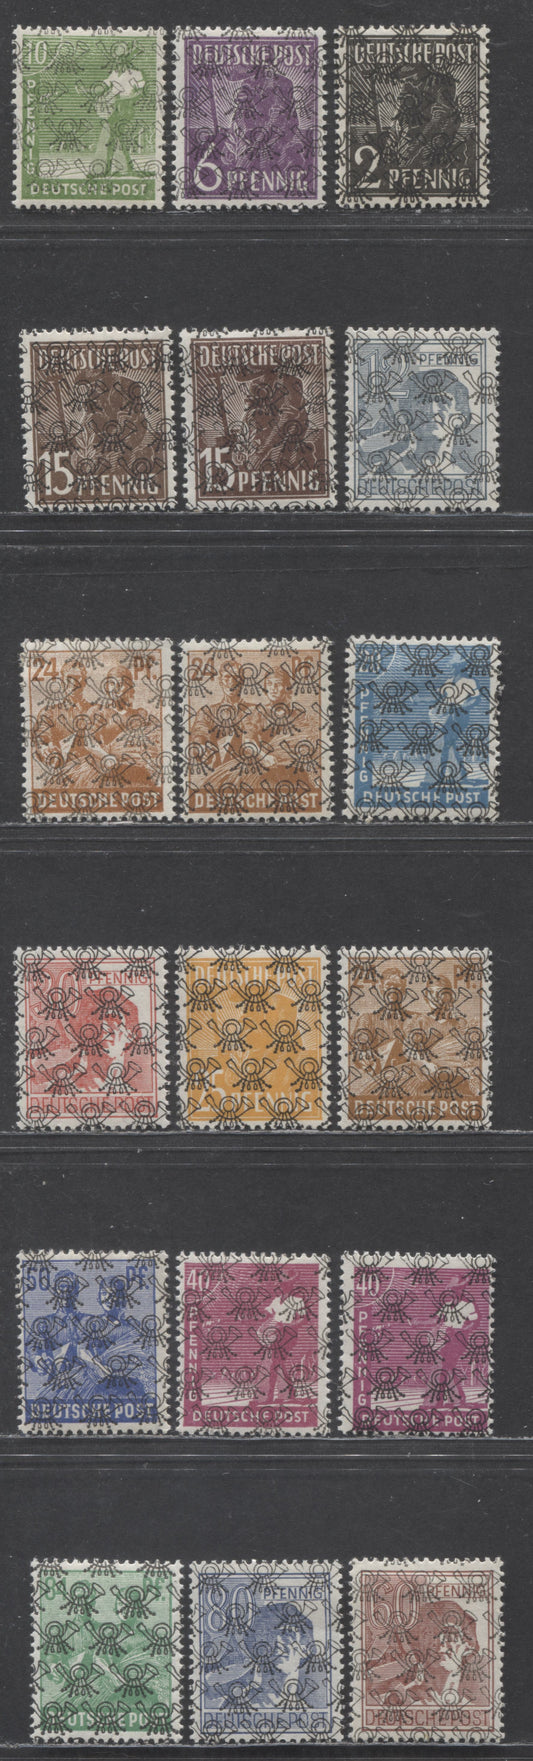 Lot 267 Germany - American and British Zone MI#36IIa (617)/51IIa (633) 1947-1948 Pictorial Issue With Network Posthorn Overprint, 18 F/VFOG Singles Including Additional Shades, Ridged Gum, Click on Listing to See ALL Pictures, 2023 Michel Cat. €14.40